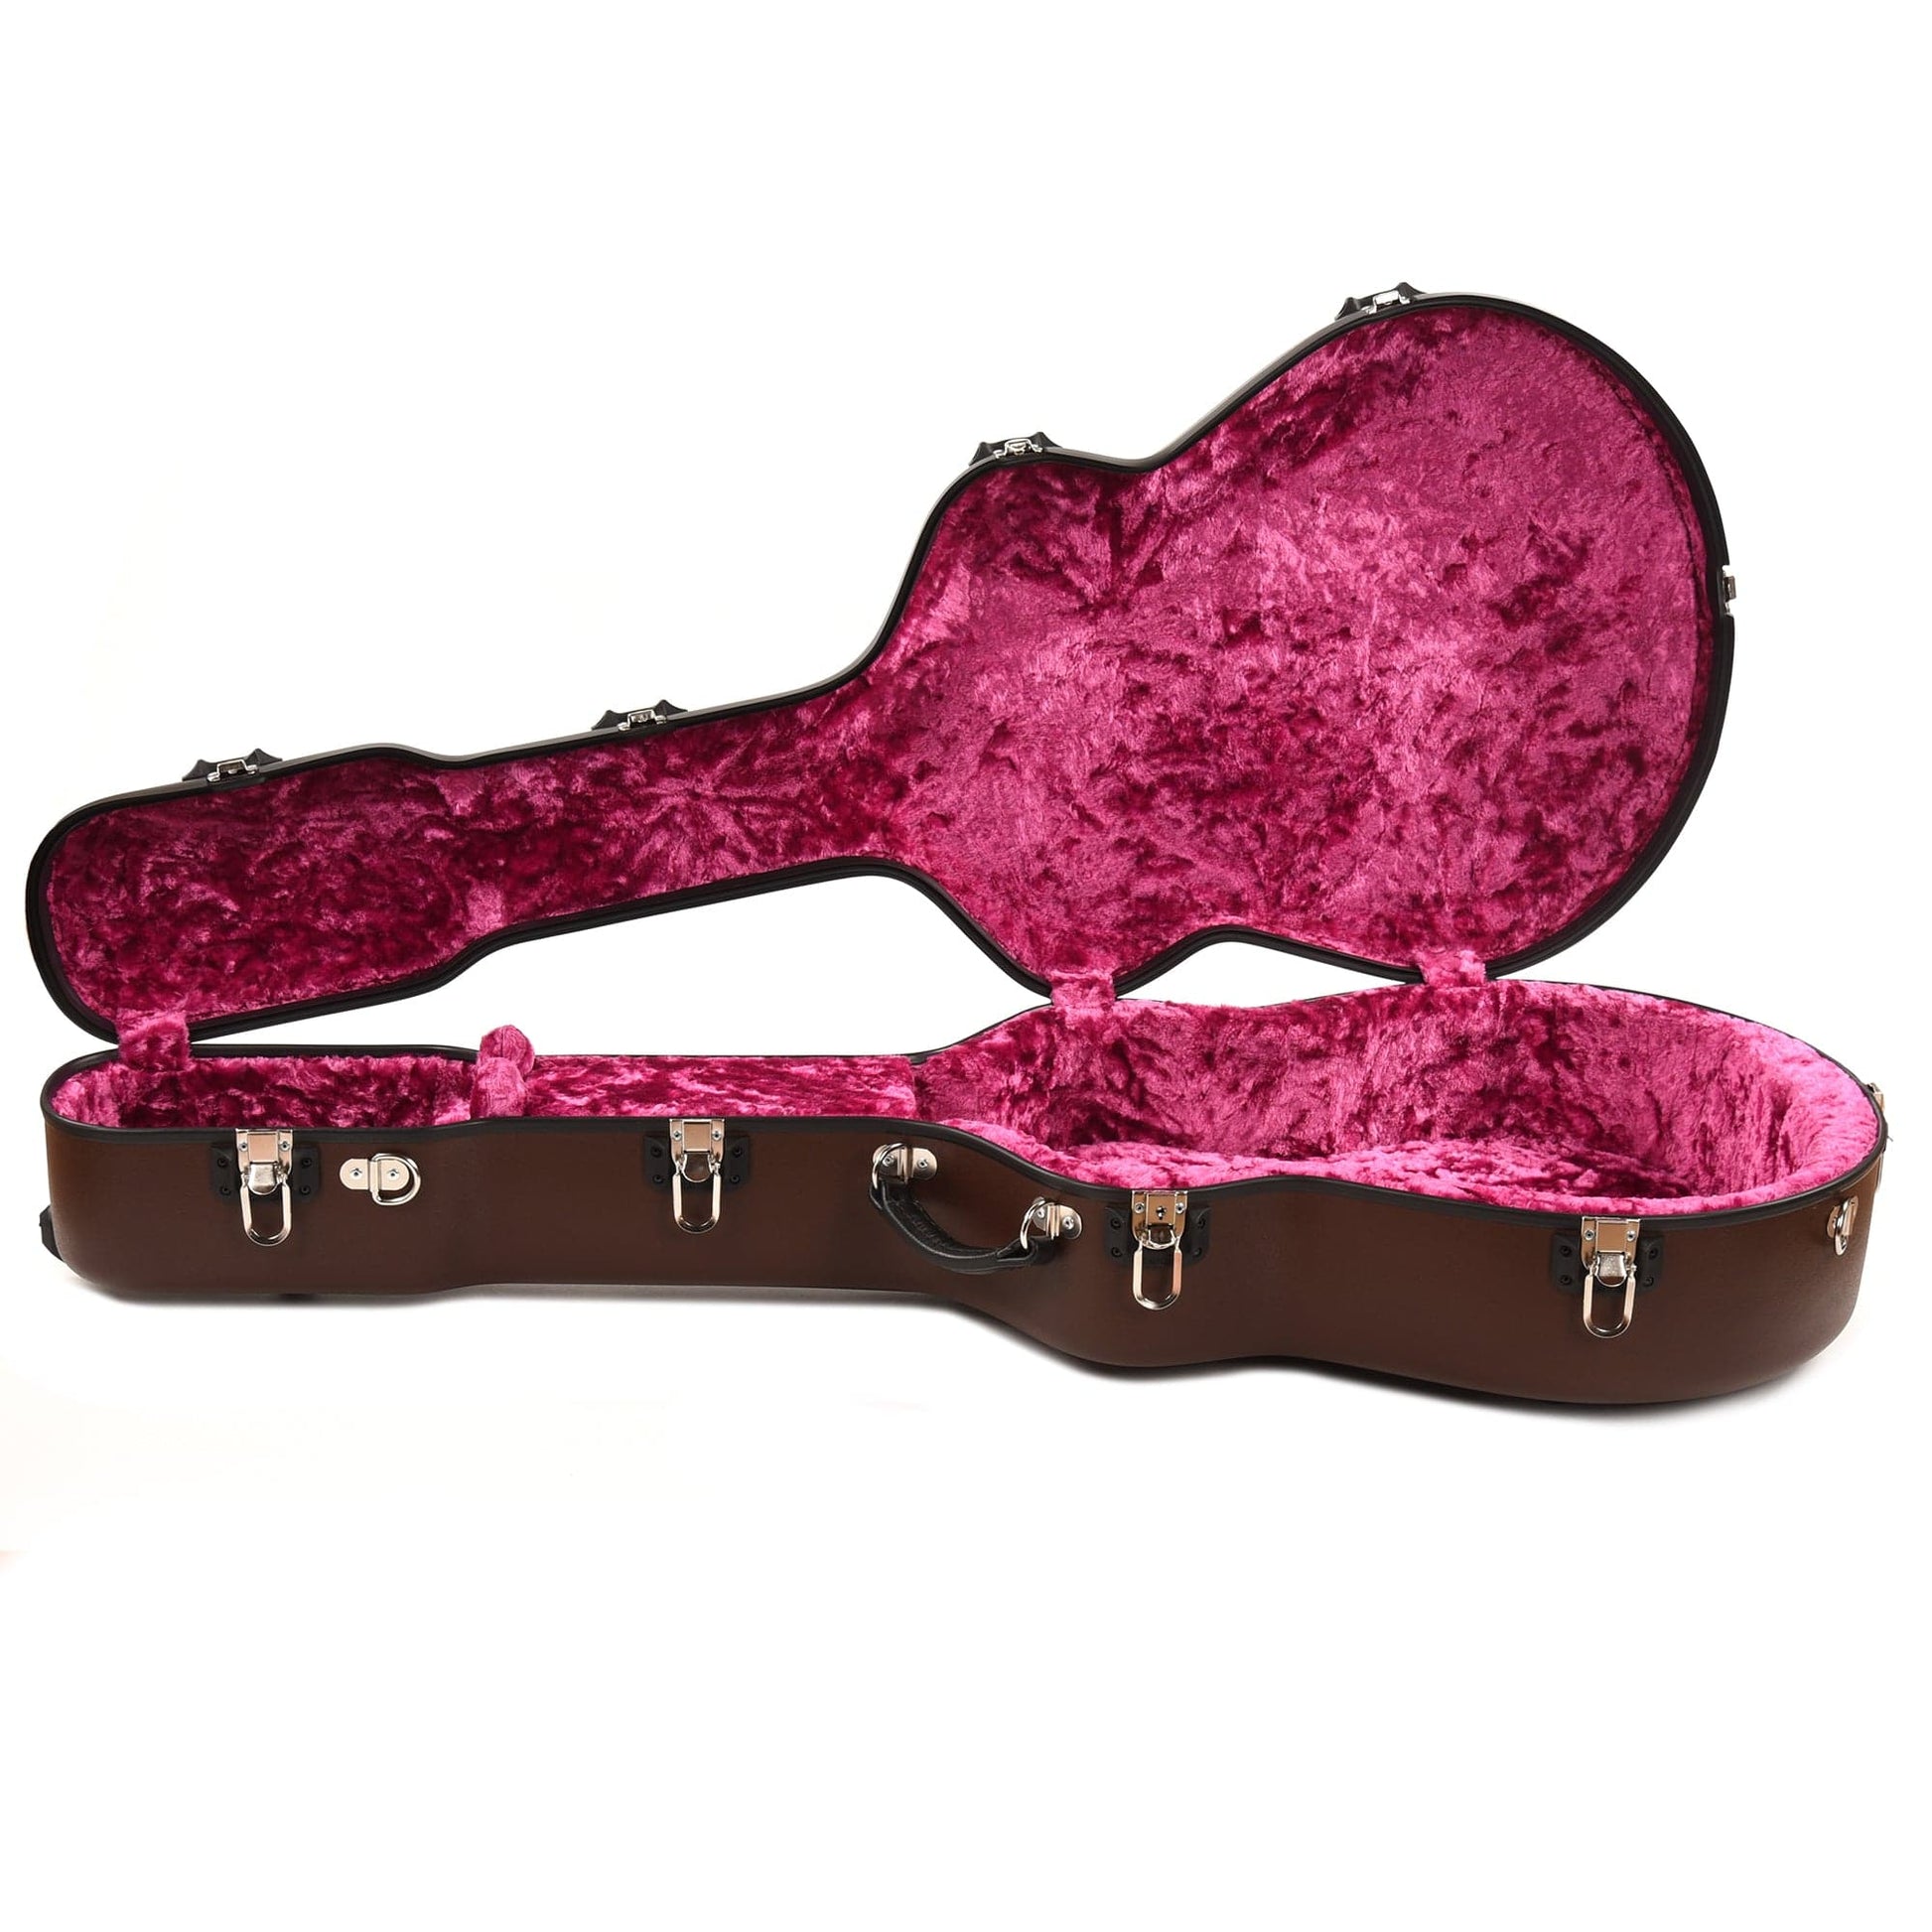 Calton Cases Acoustic J-45 Guitar Case Brown w/Pink Velvet Interior Accessories / Cases and Gig Bags / Guitar Cases